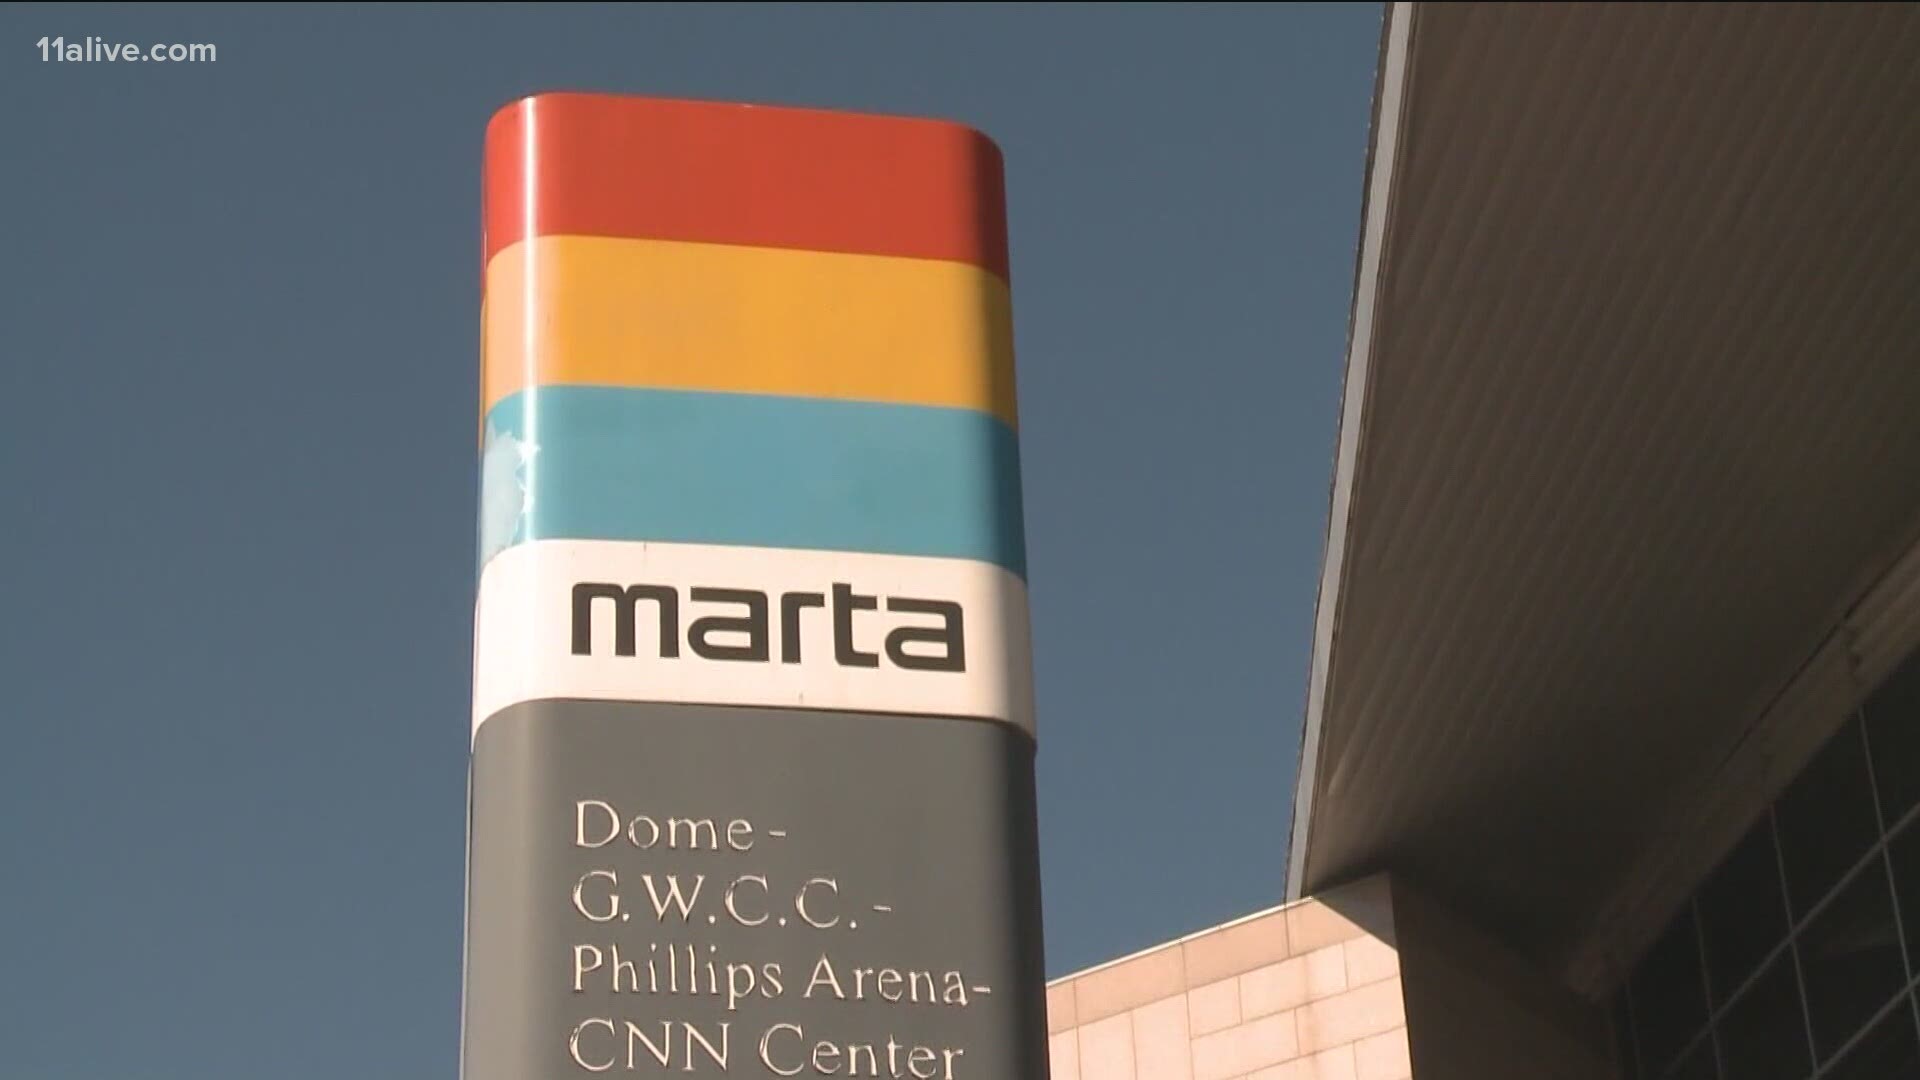 According to a release, the housing will have access to MARTA’s 38 heavy rail stations and 12 Atlanta Streetcar light rail stops.